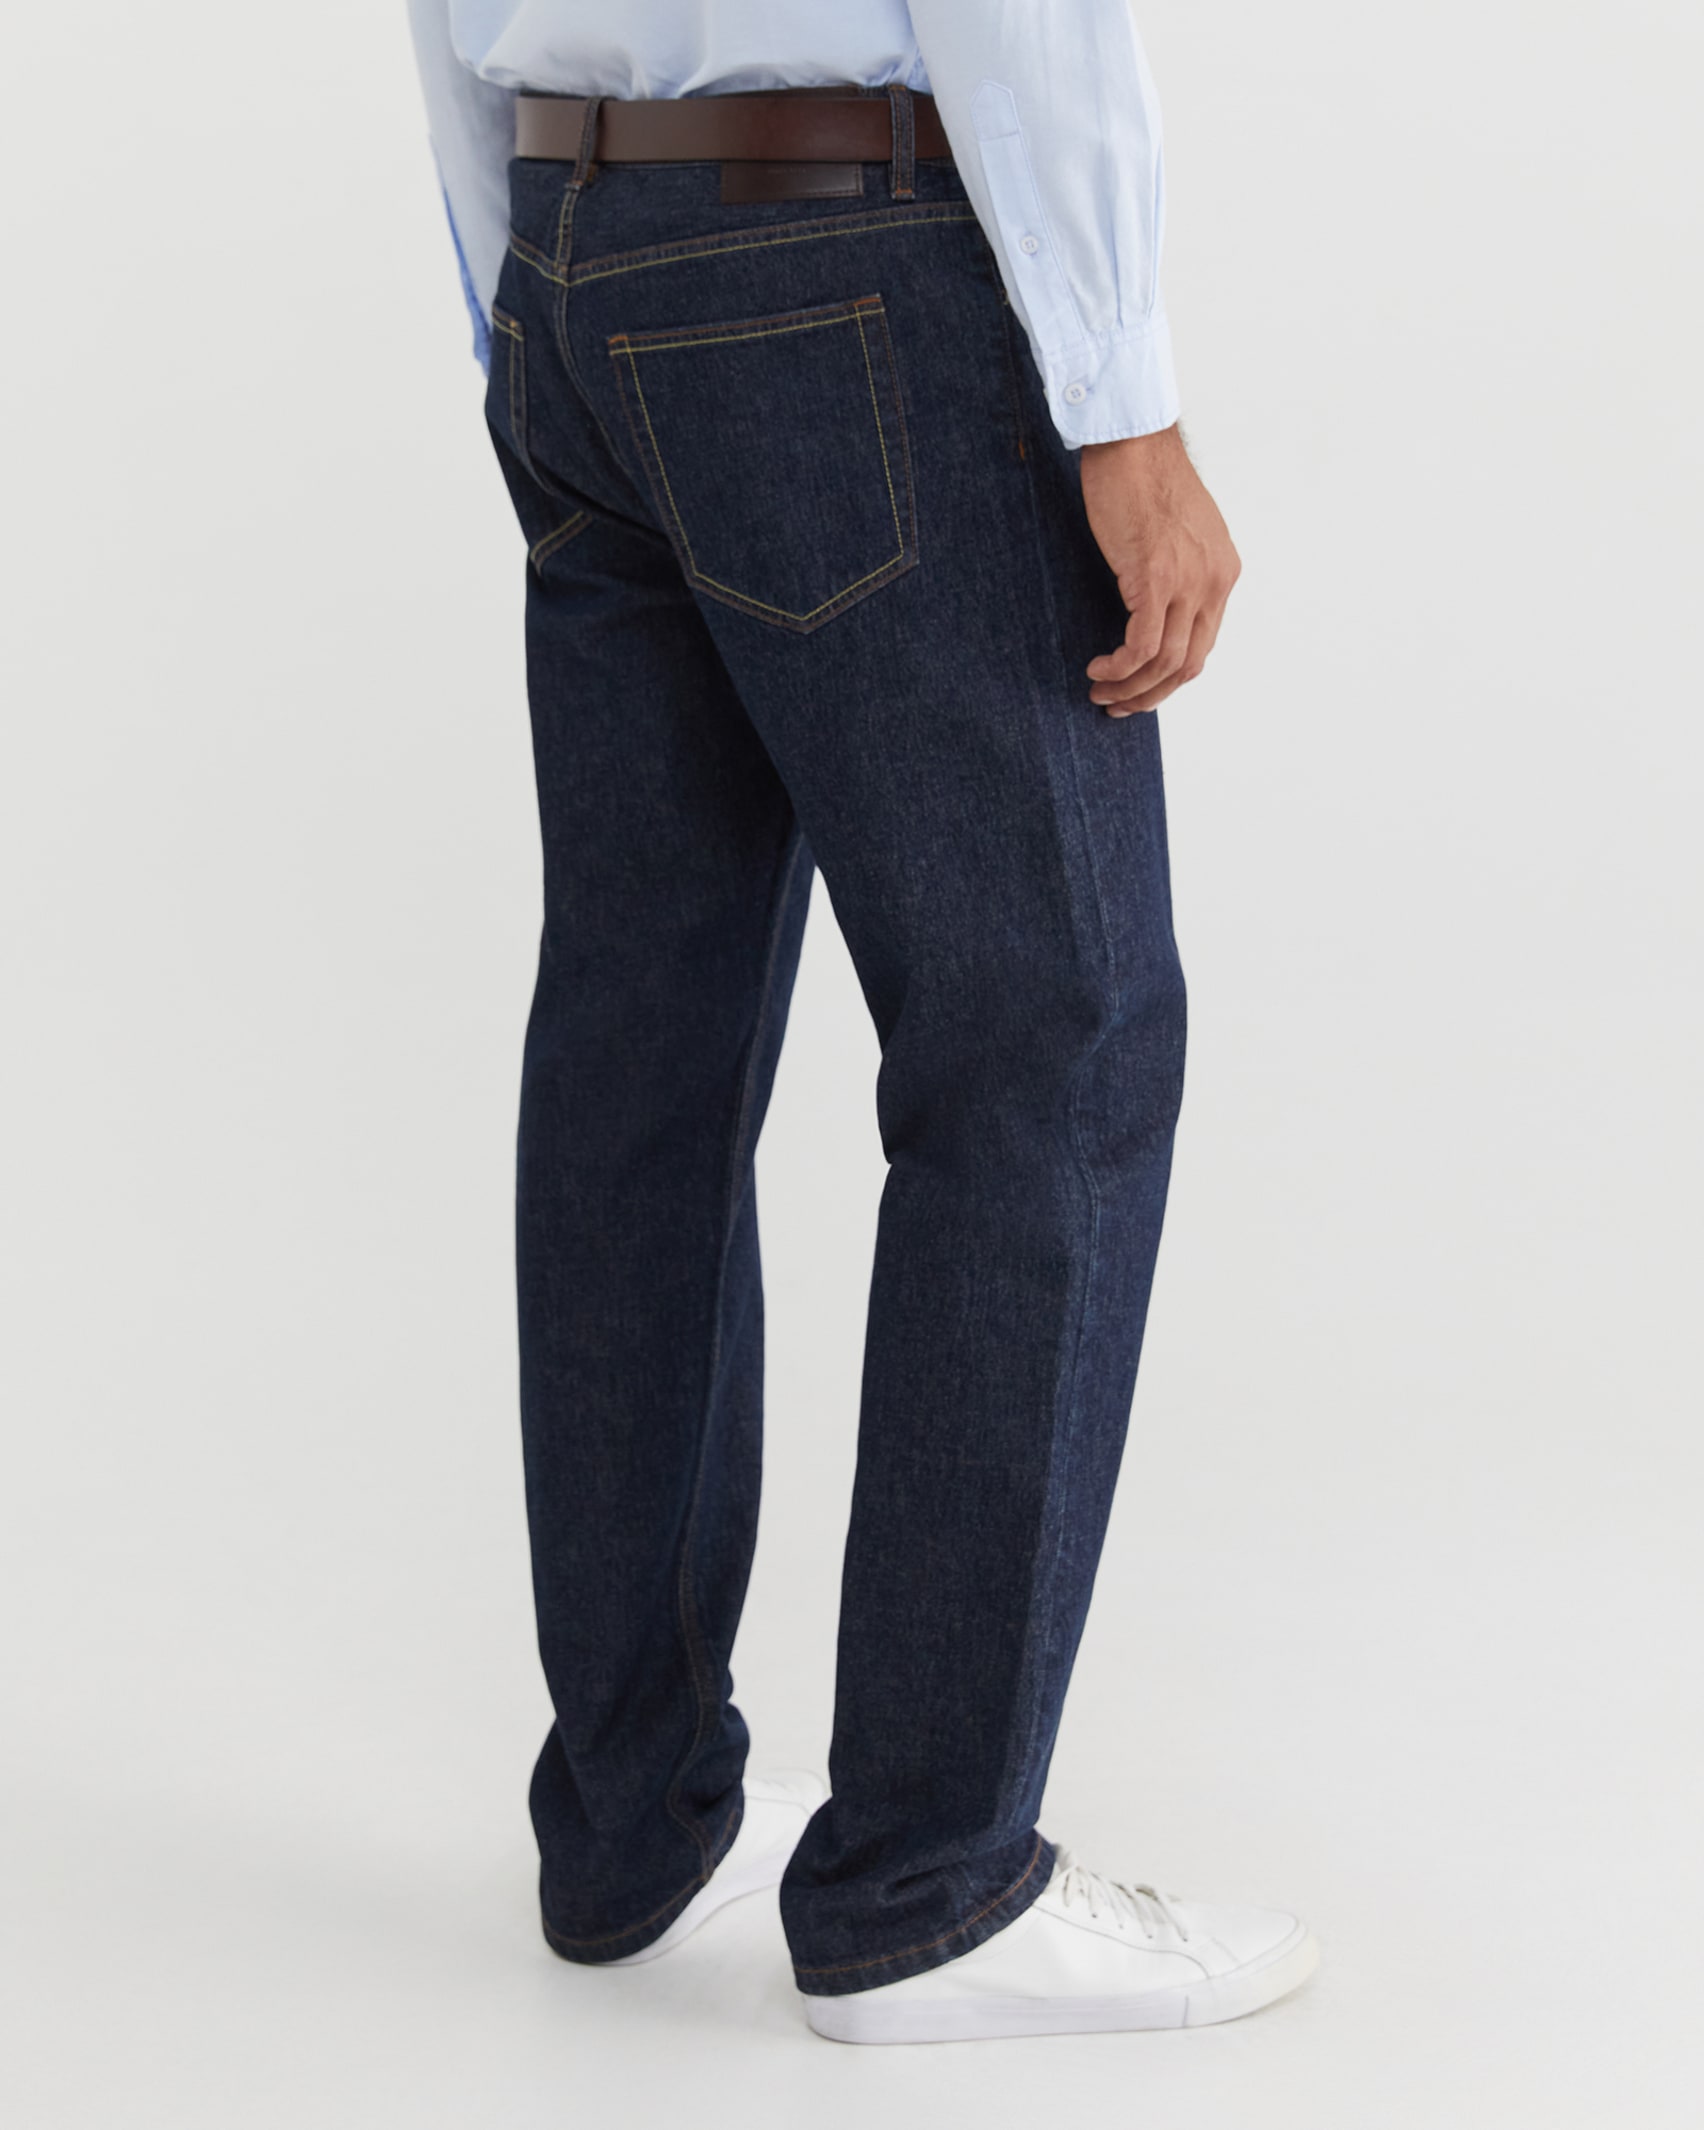 Portland Relaxed Jean in RINSE WASH